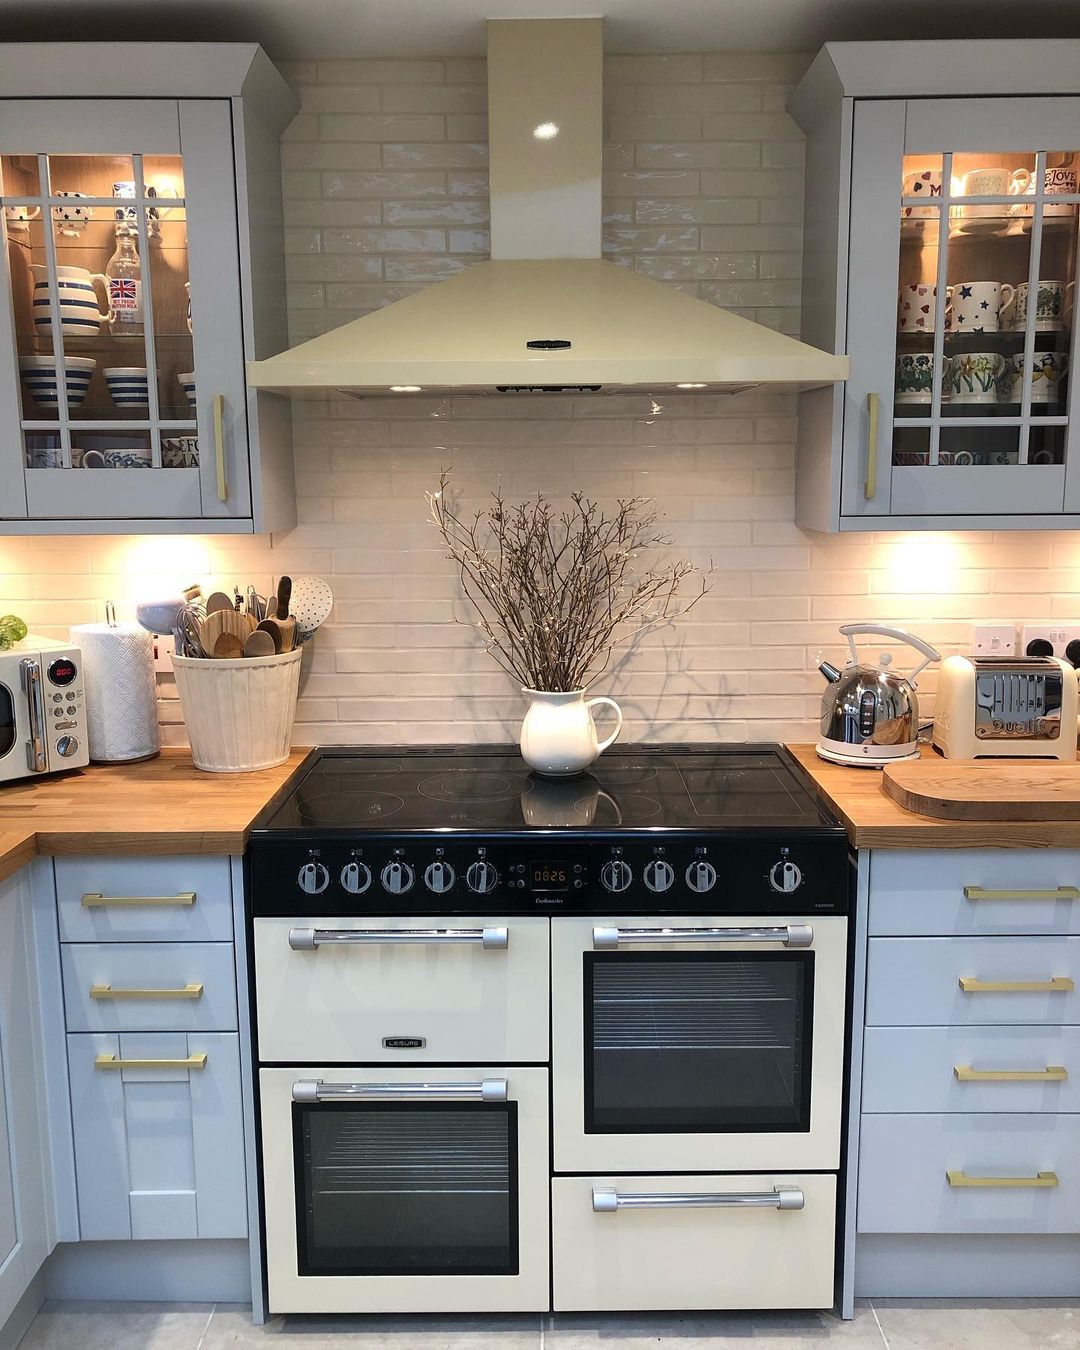 Vintage style white and black oven in a kitchen with light blue cabinetry. Photo by Instagram user @lavender_cottage_living